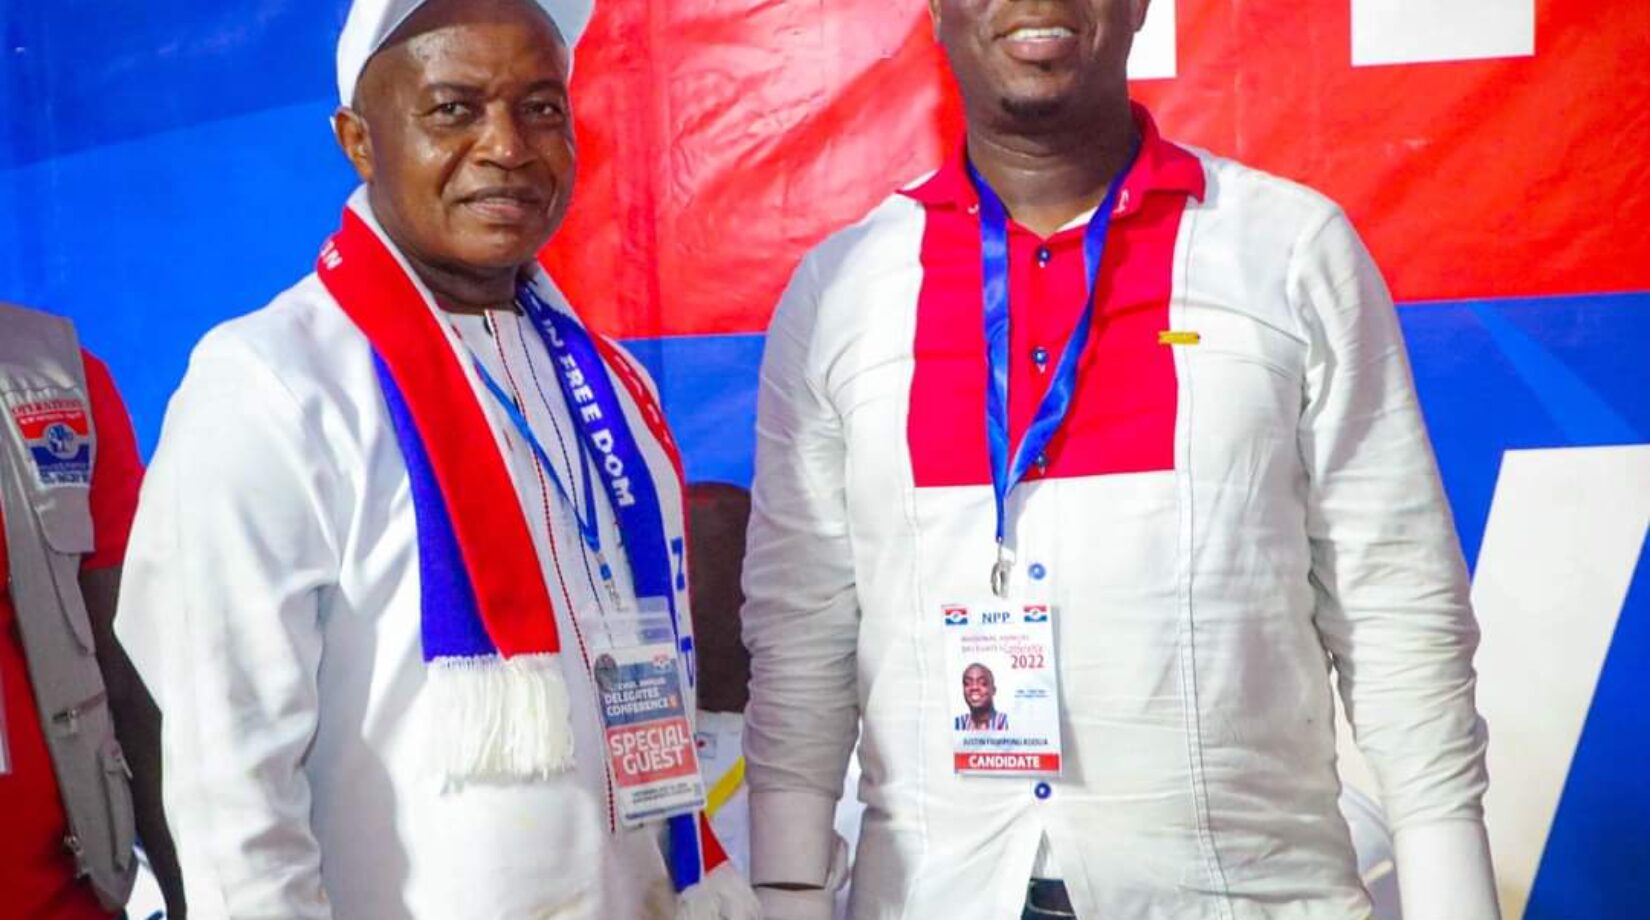 Ahead of 2024 Polls:Forgive Us And Let’s Build A New Relationship-JFK to Ashanti Media